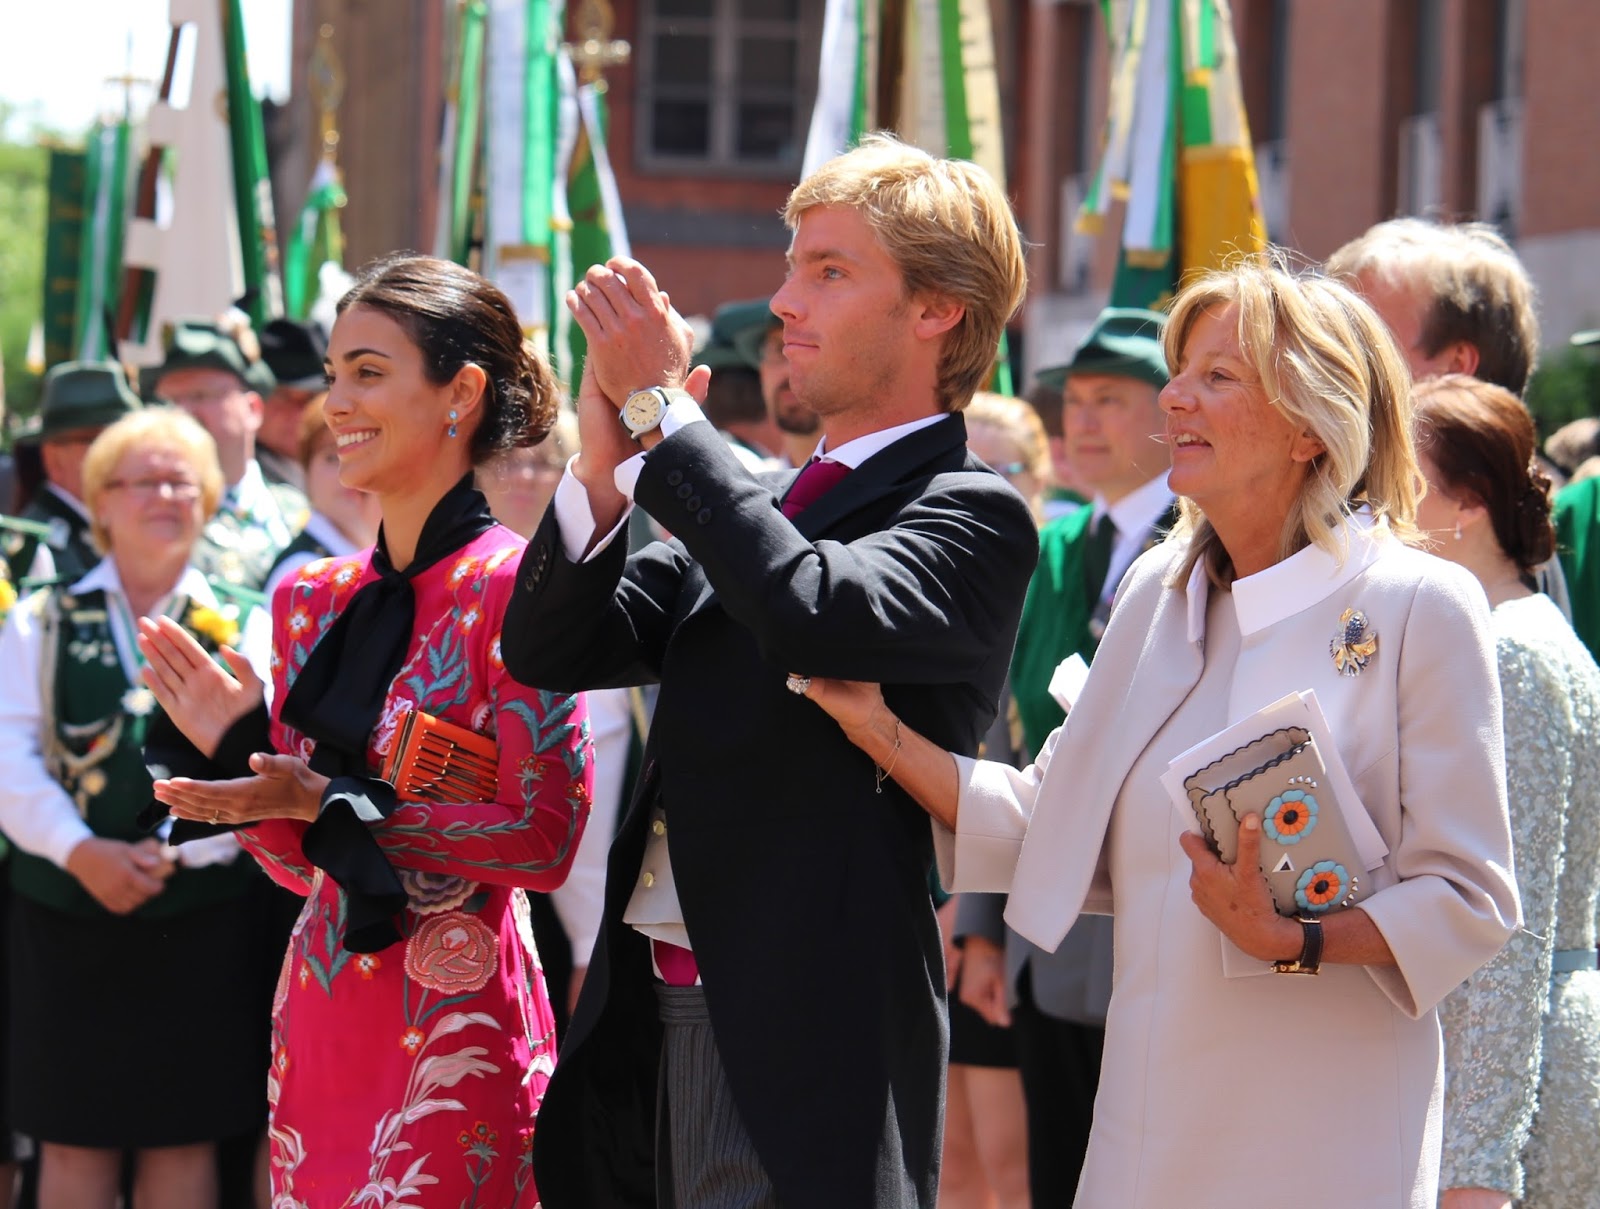 Prince Christian and Princess Alessandra of Hannover attended